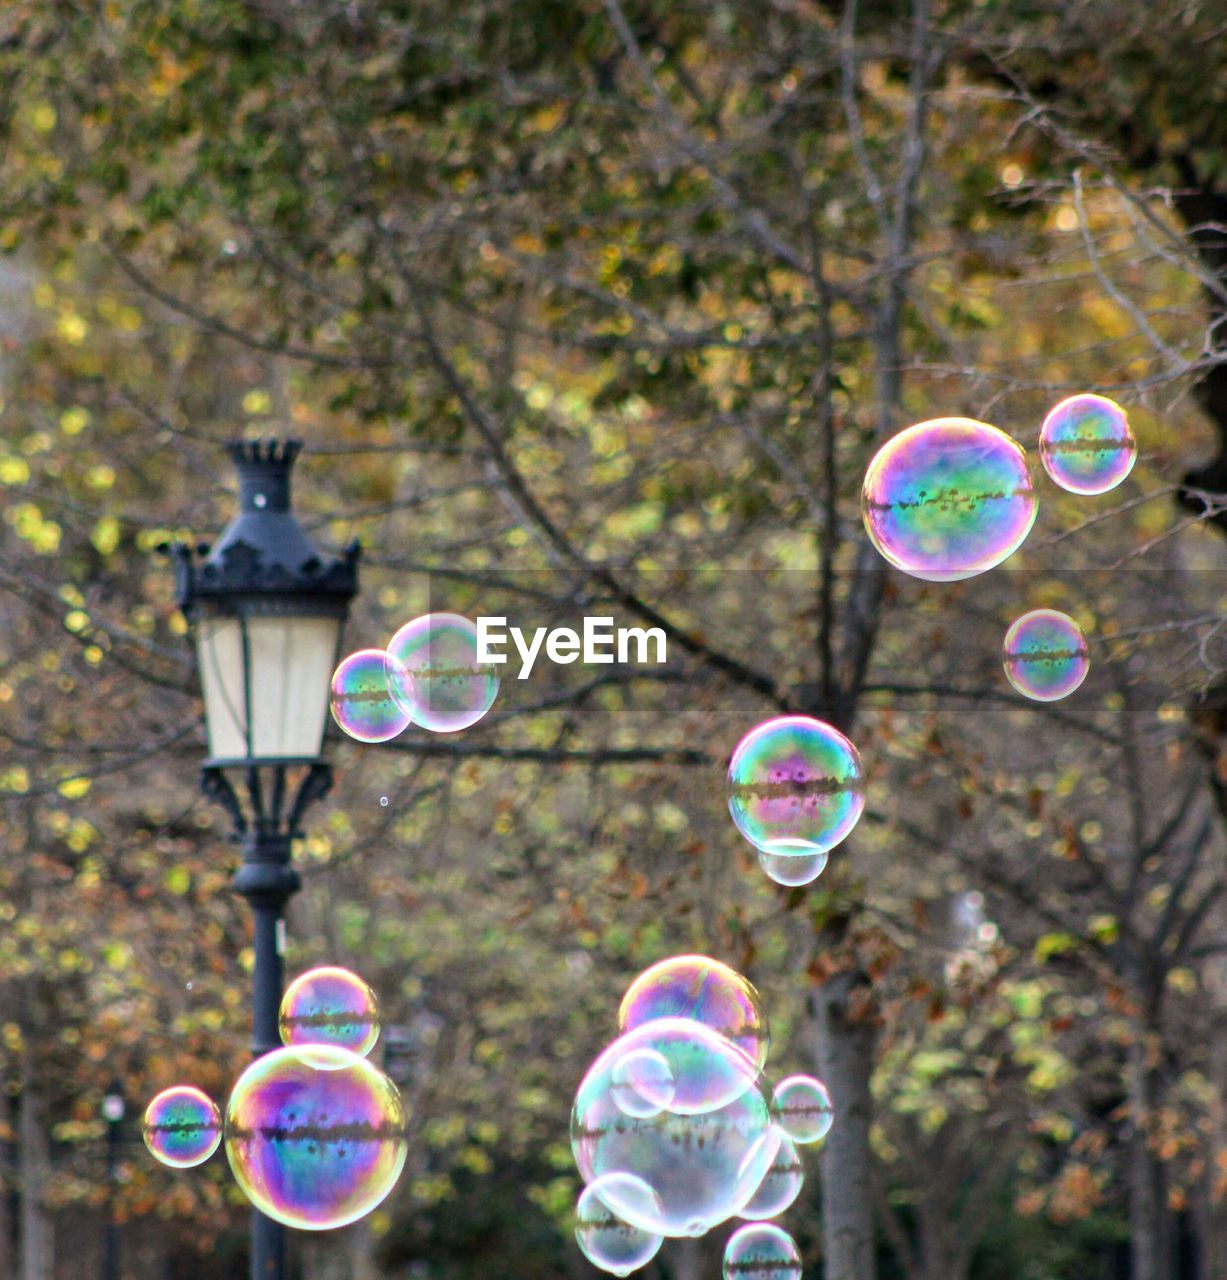 CLOSE-UP OF BUBBLES IN PARK